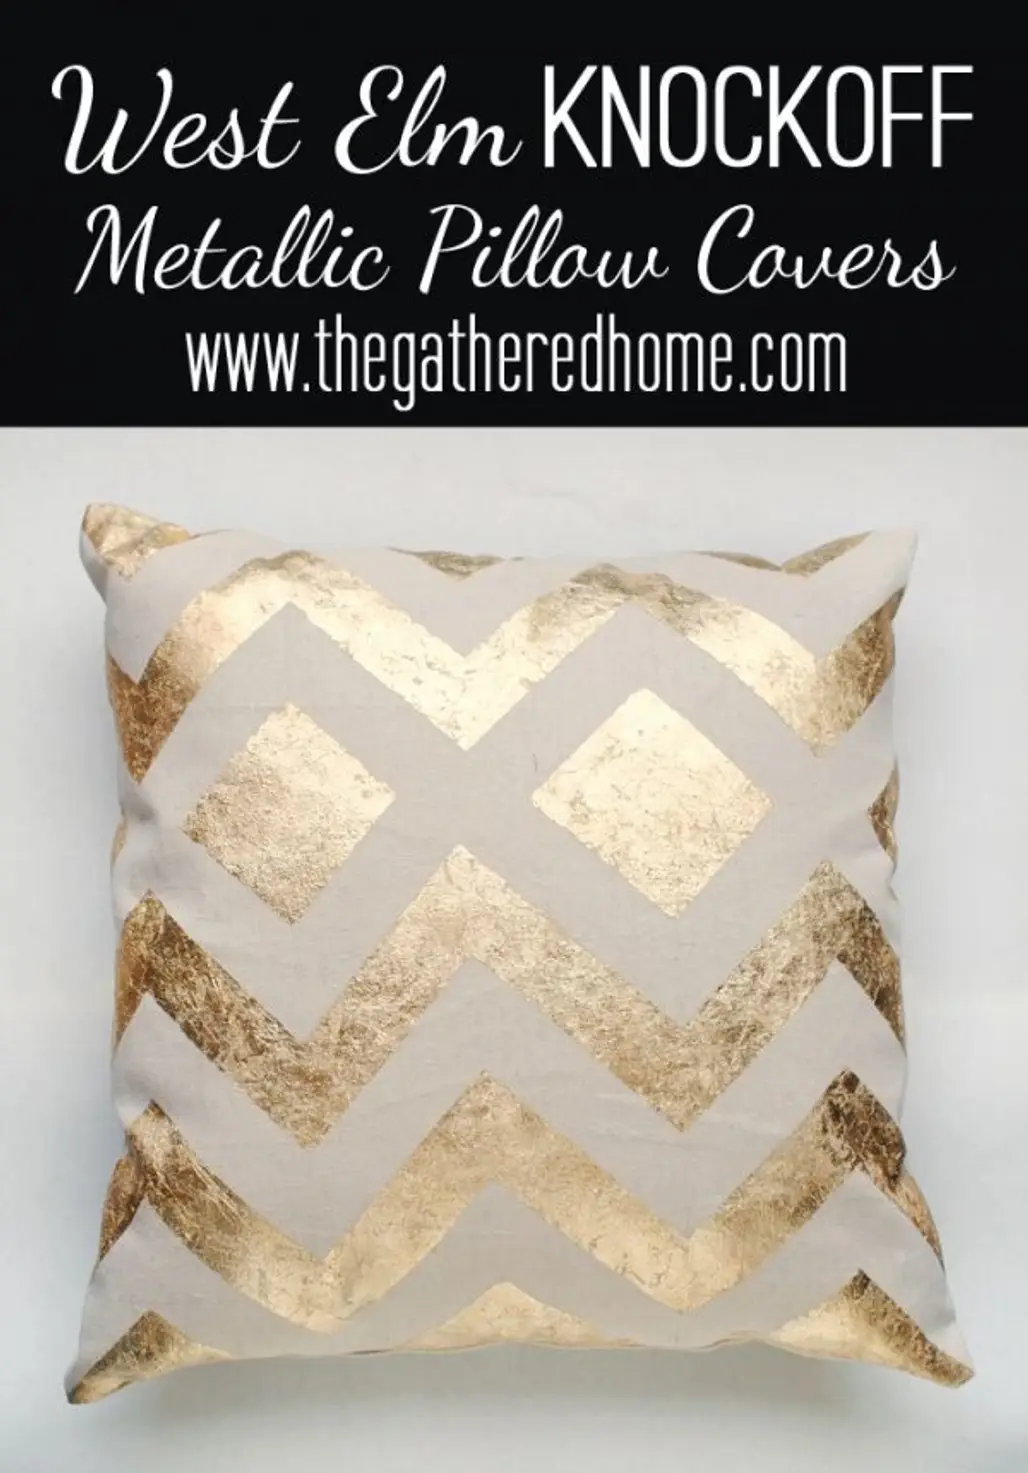 DIY West Elm Knockoff Metallic Pillow Covers